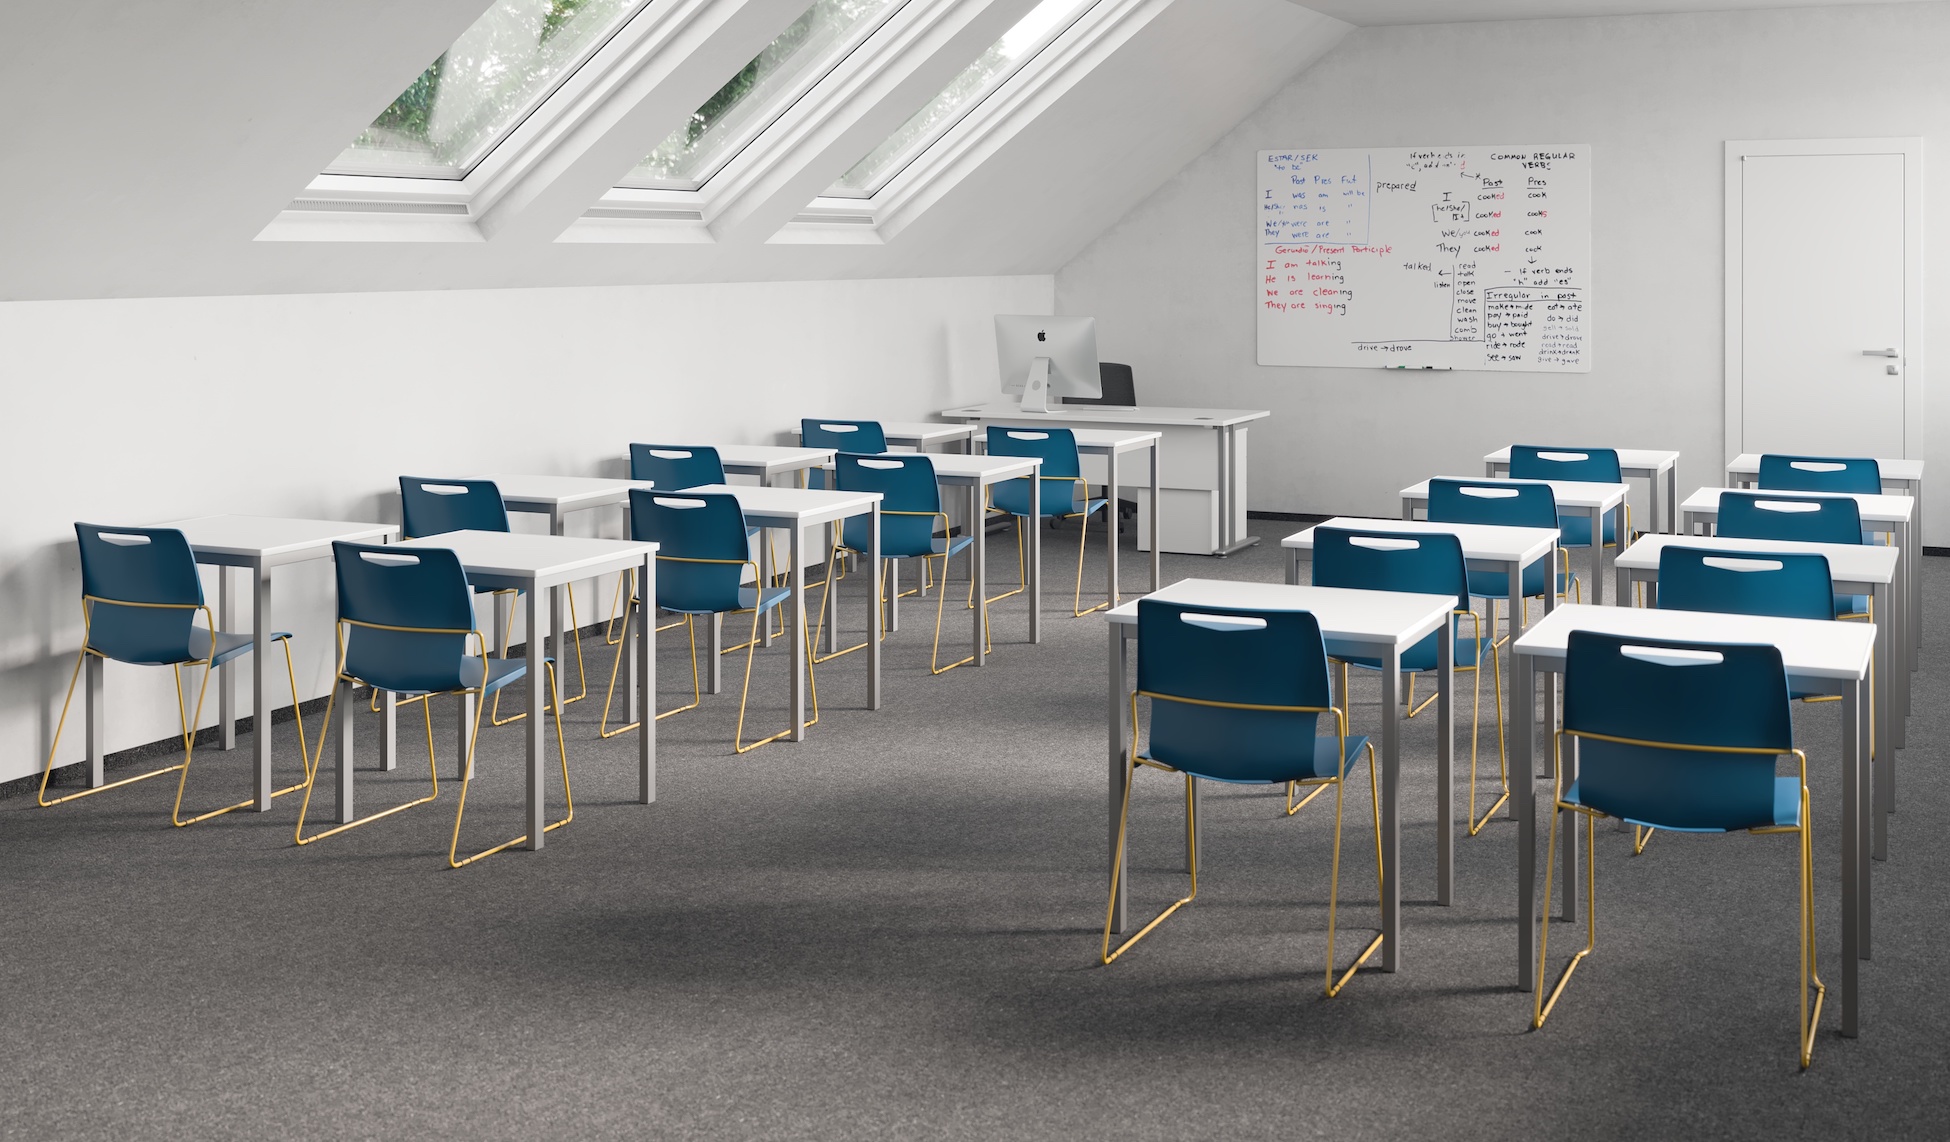 Touch chairs shown in a classroom setting